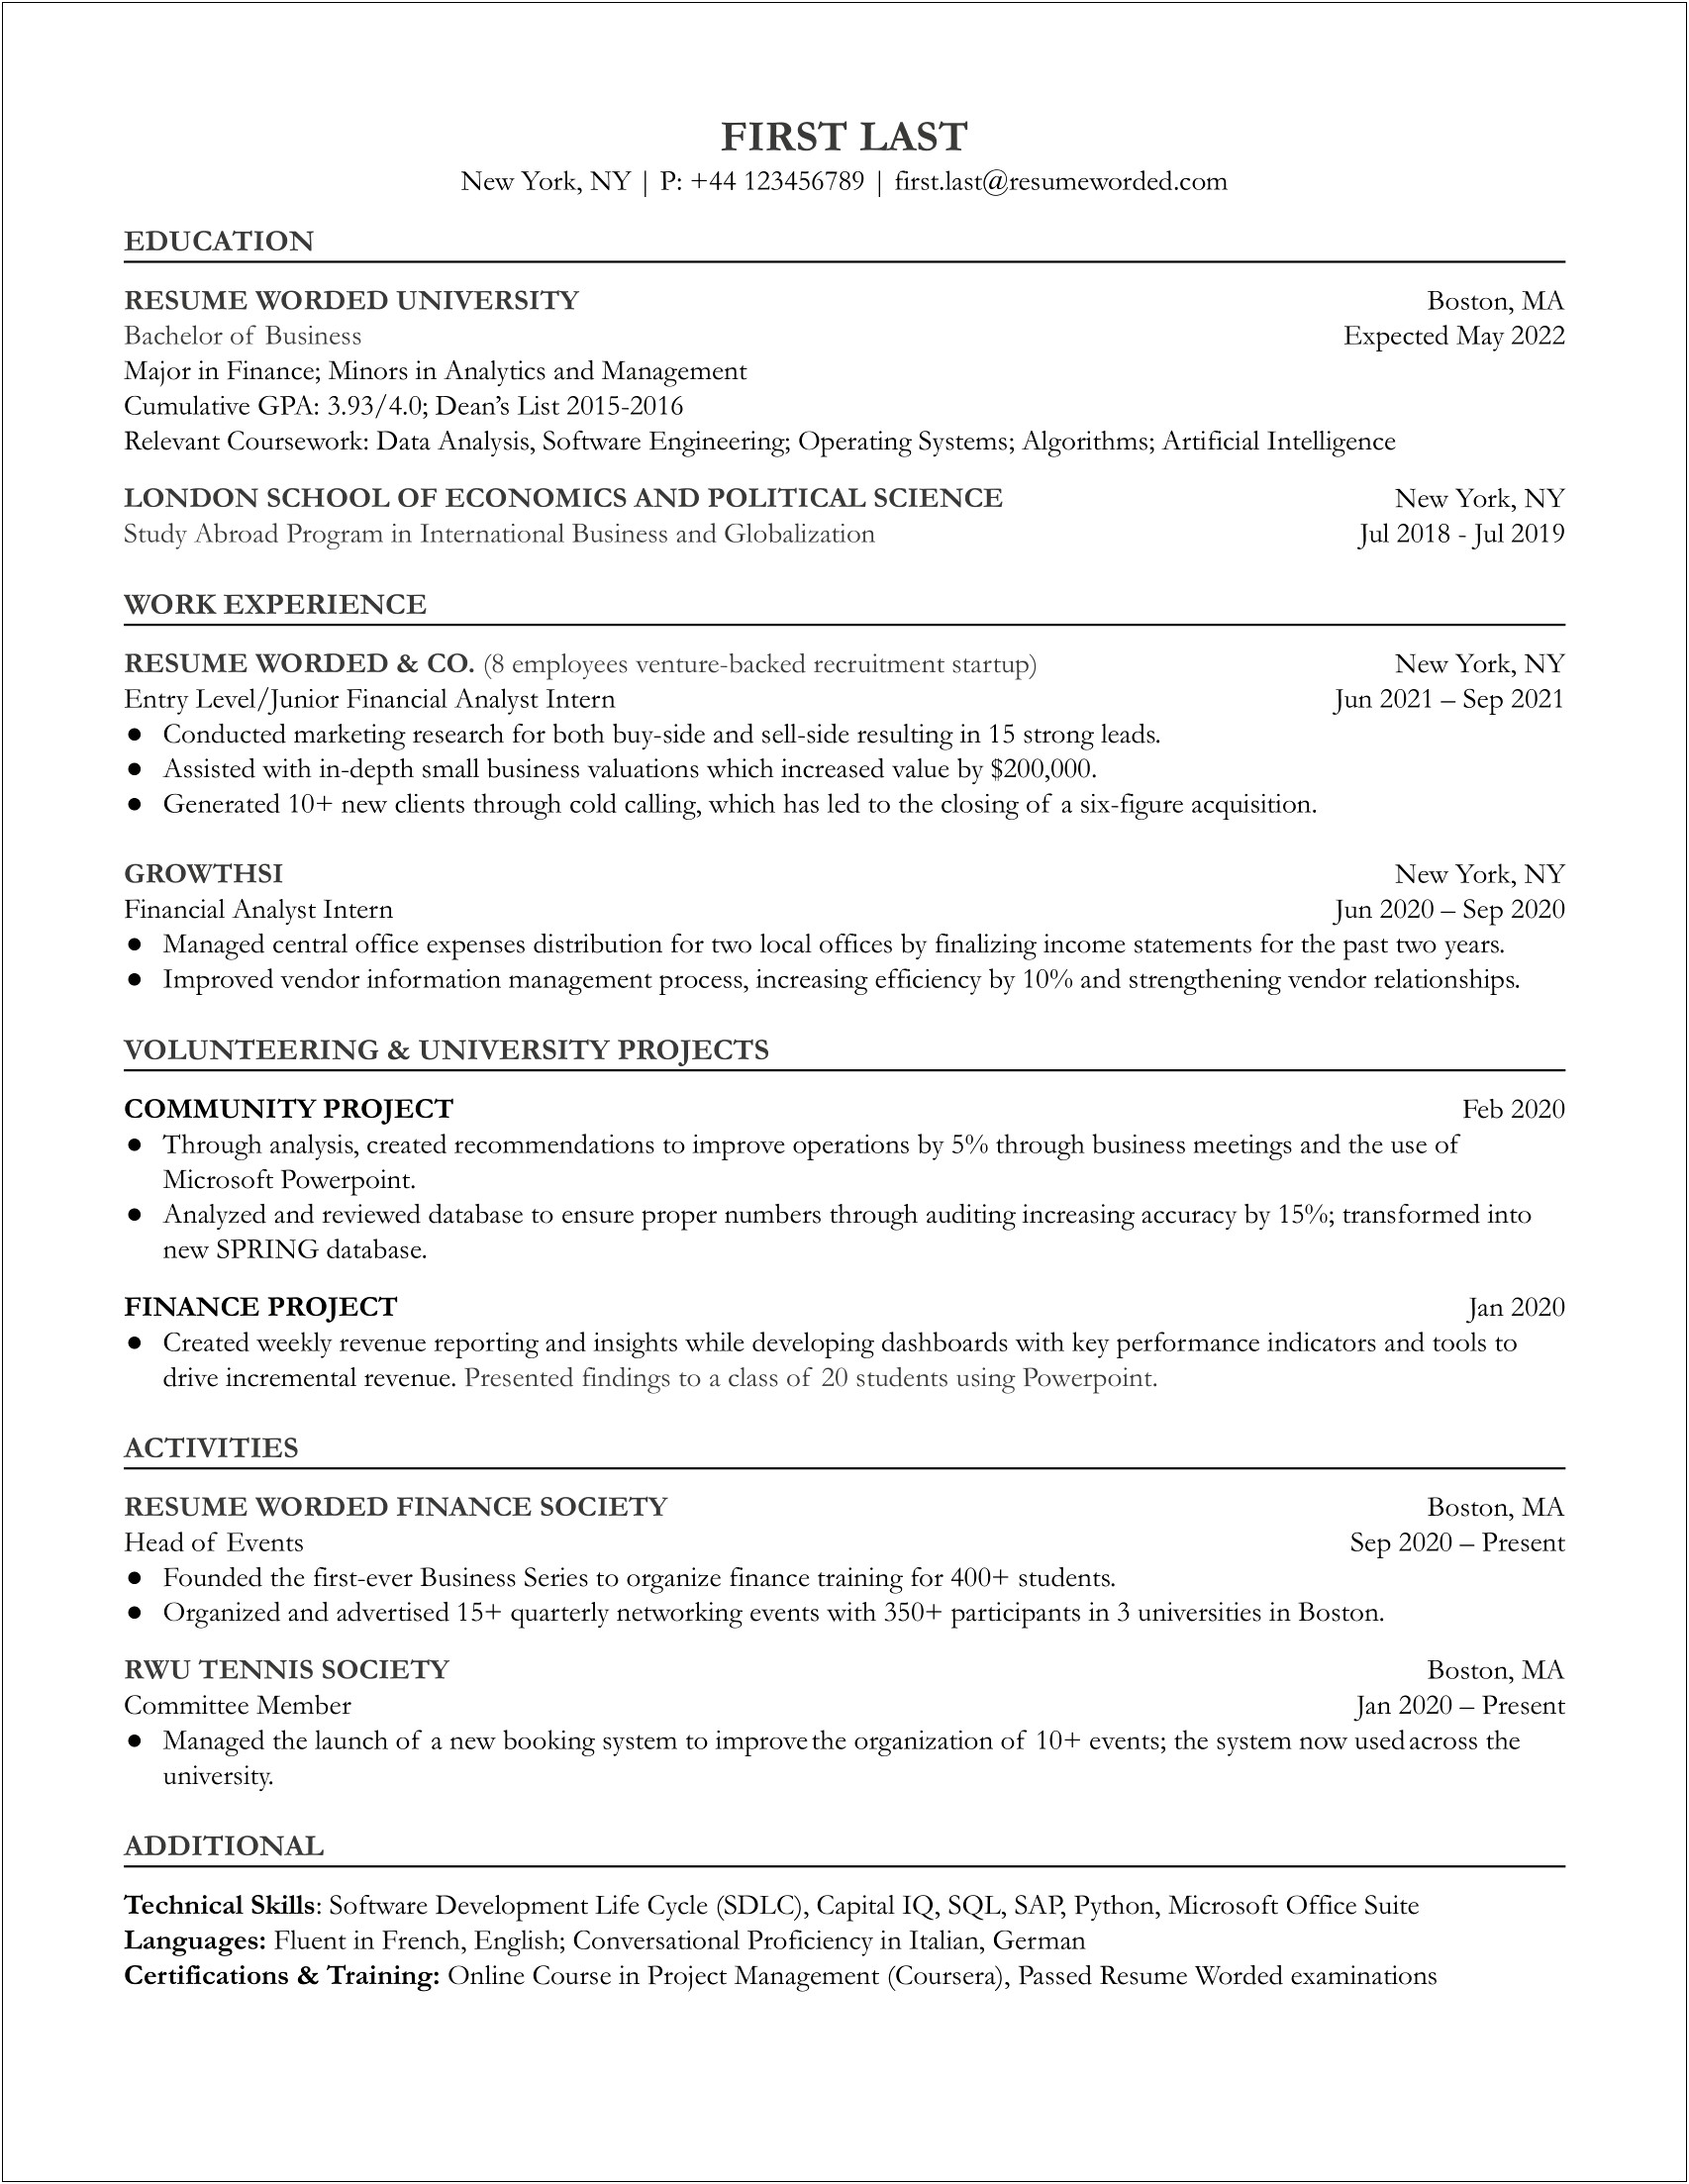 Resume Objective For Financial Analyst